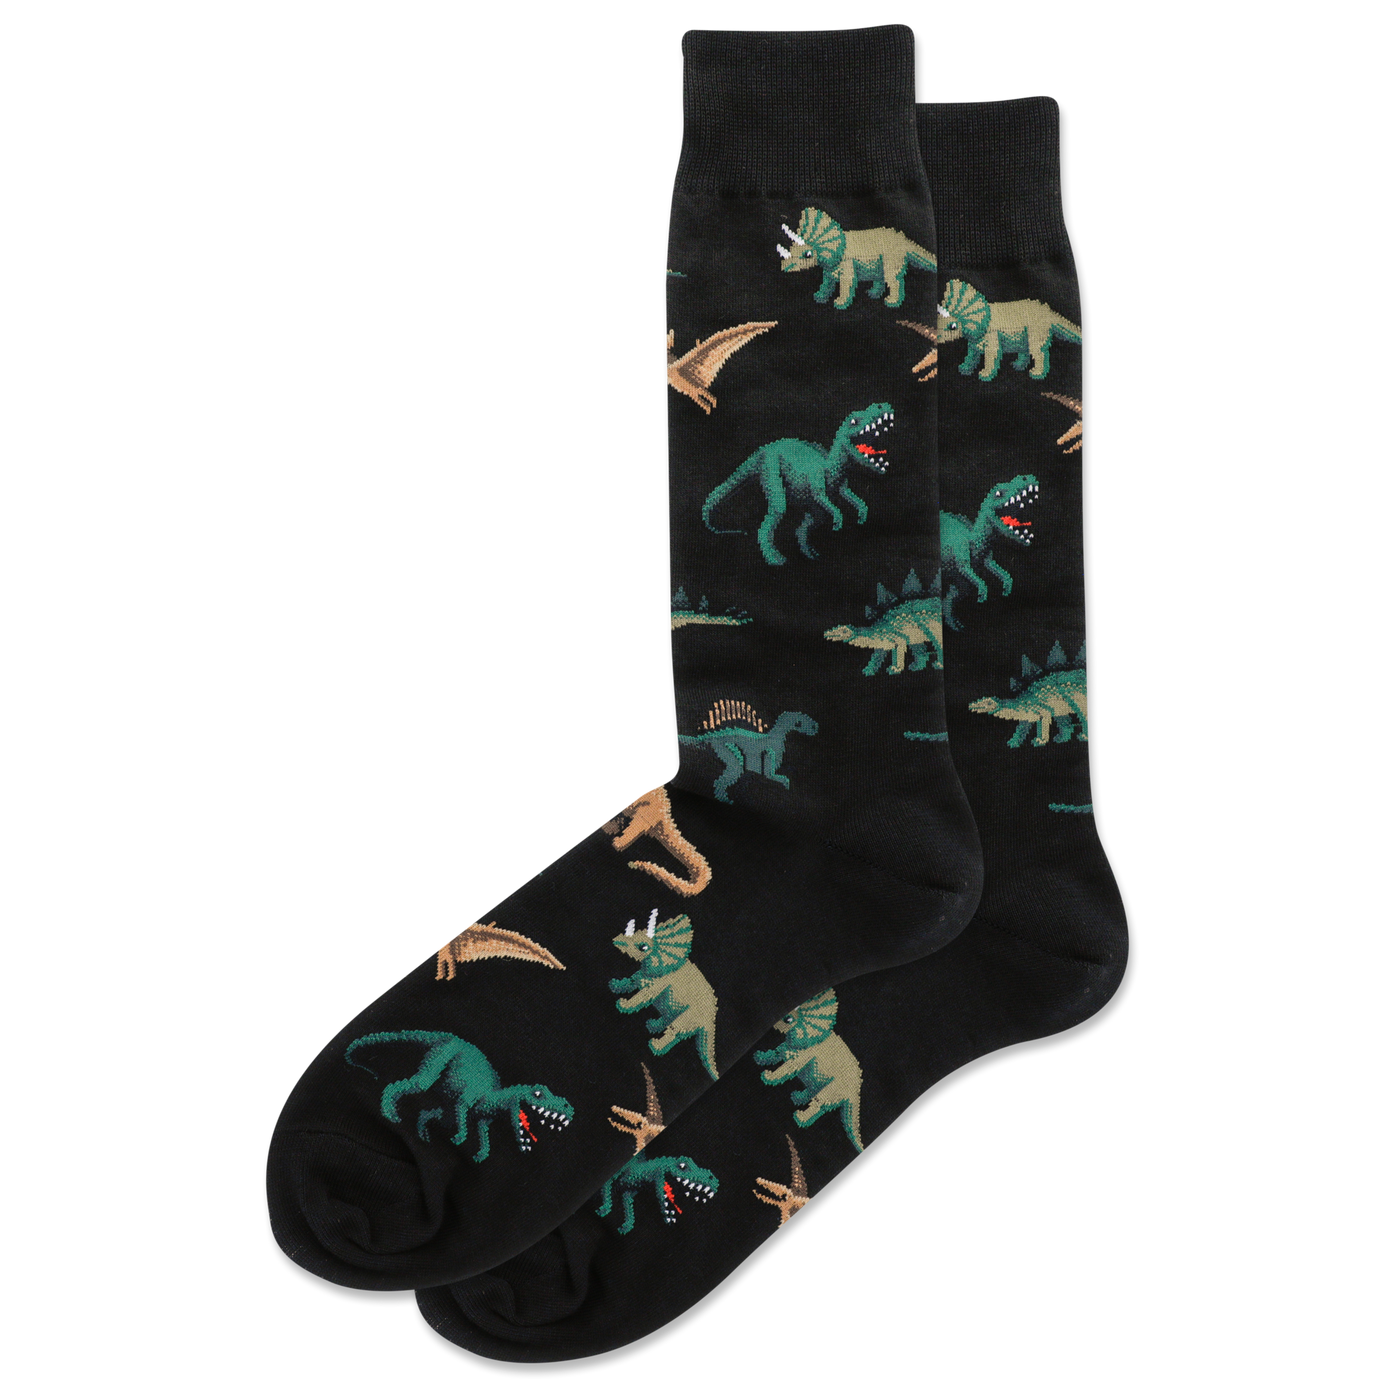 "Dinosaurs" Cotton Crew Socks by Hot Sox-Large